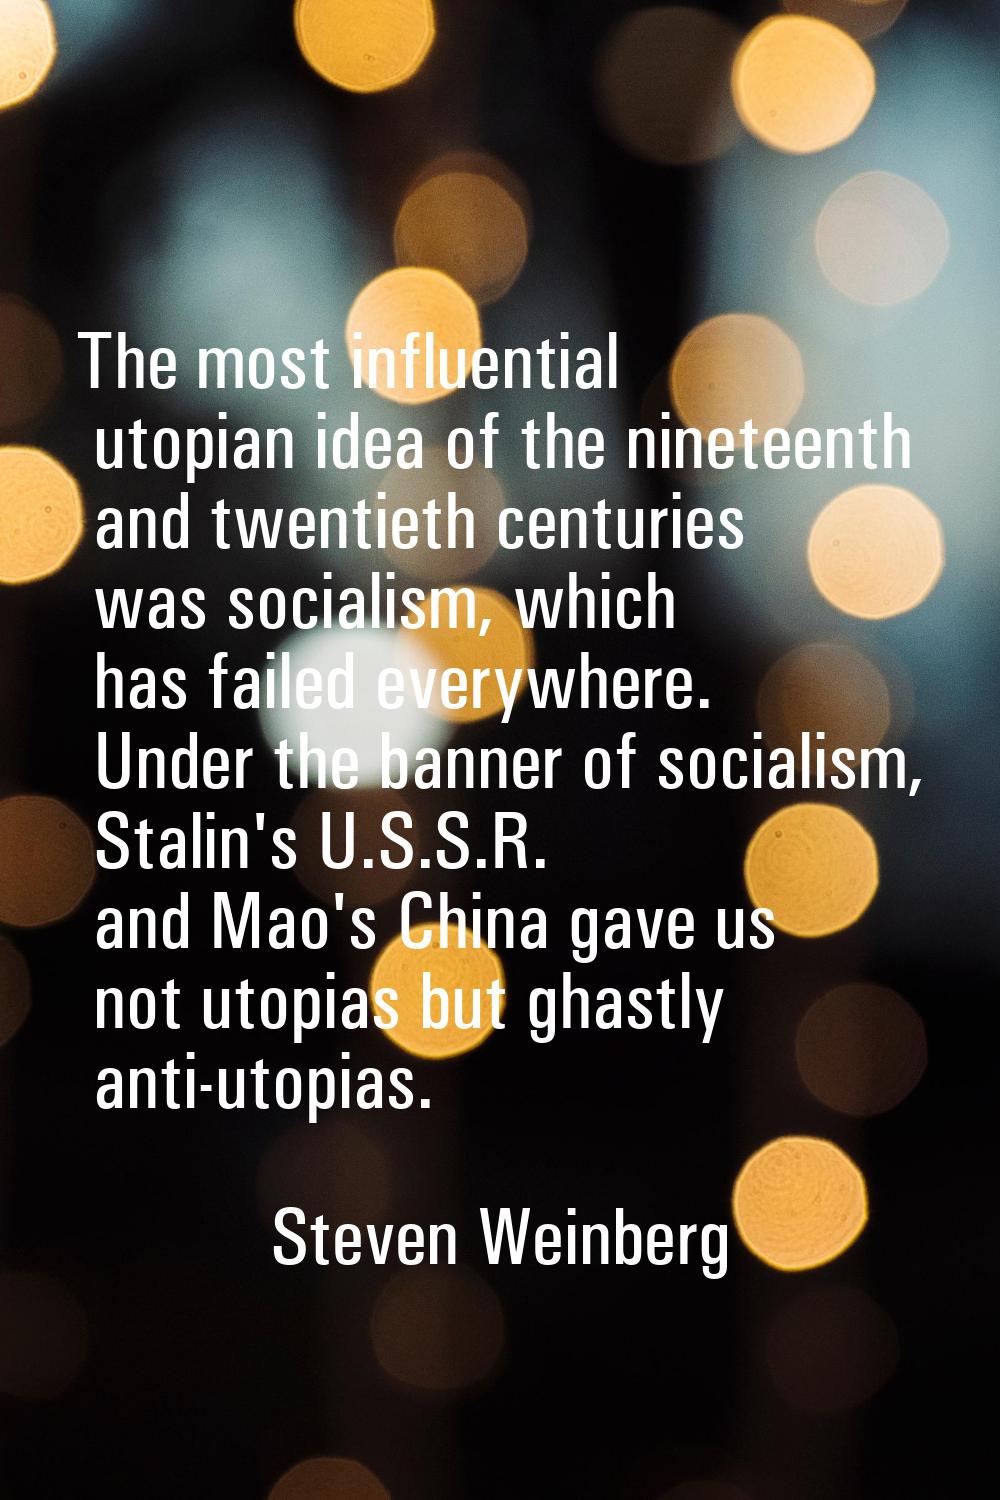 The most influential utopian idea of the nineteenth and twentieth centuries was socialism, which ha